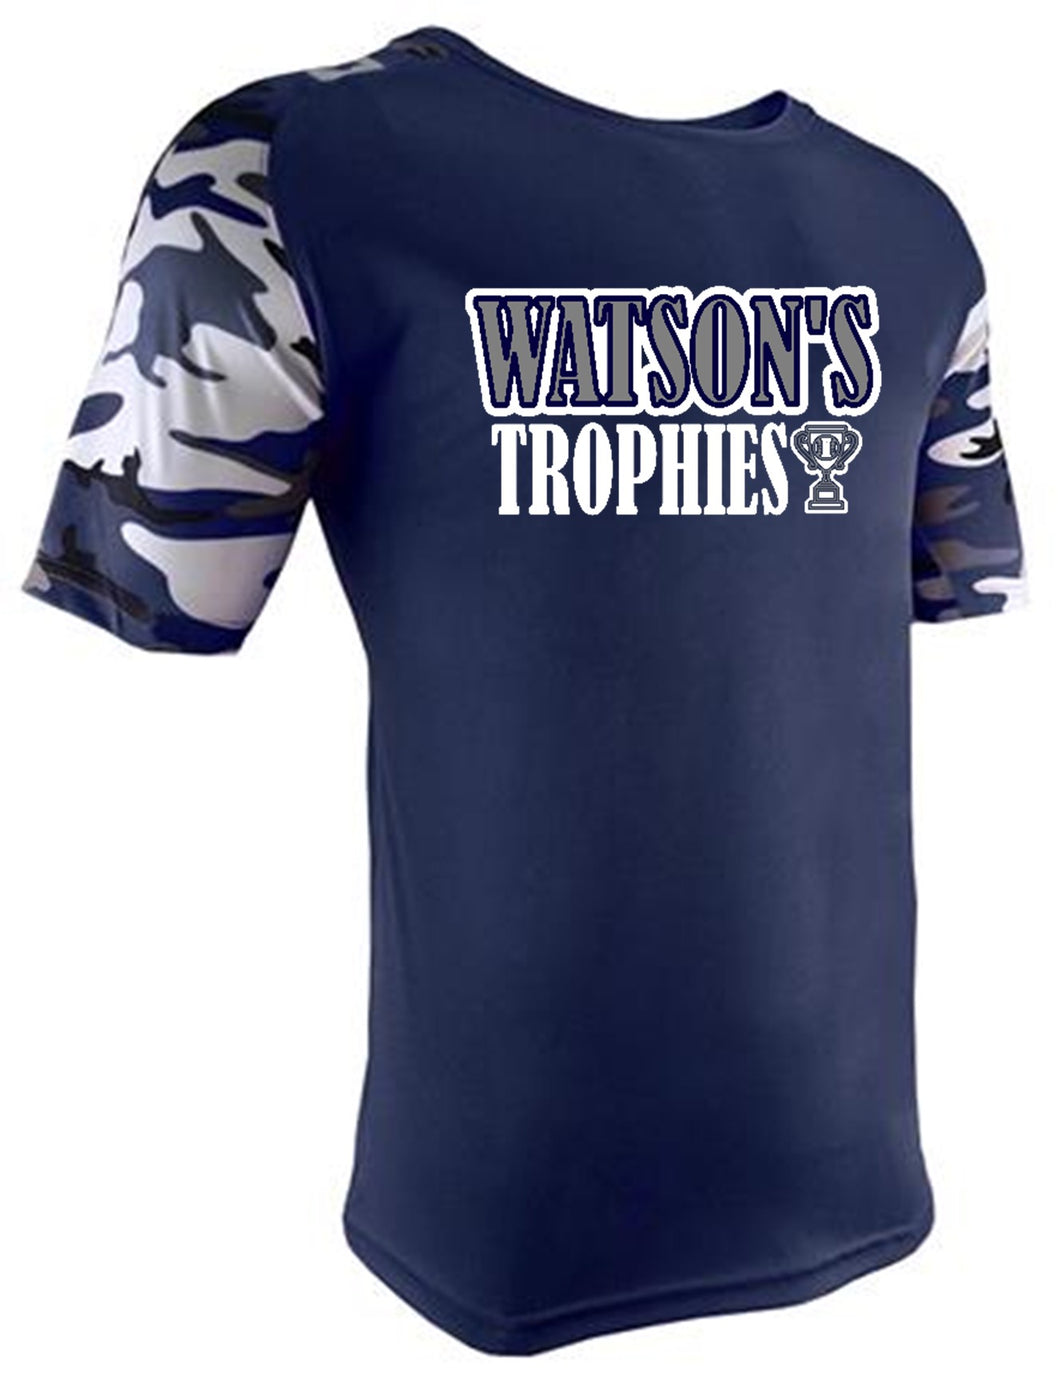 Watson's Trophies Jersey - Youth and Adult